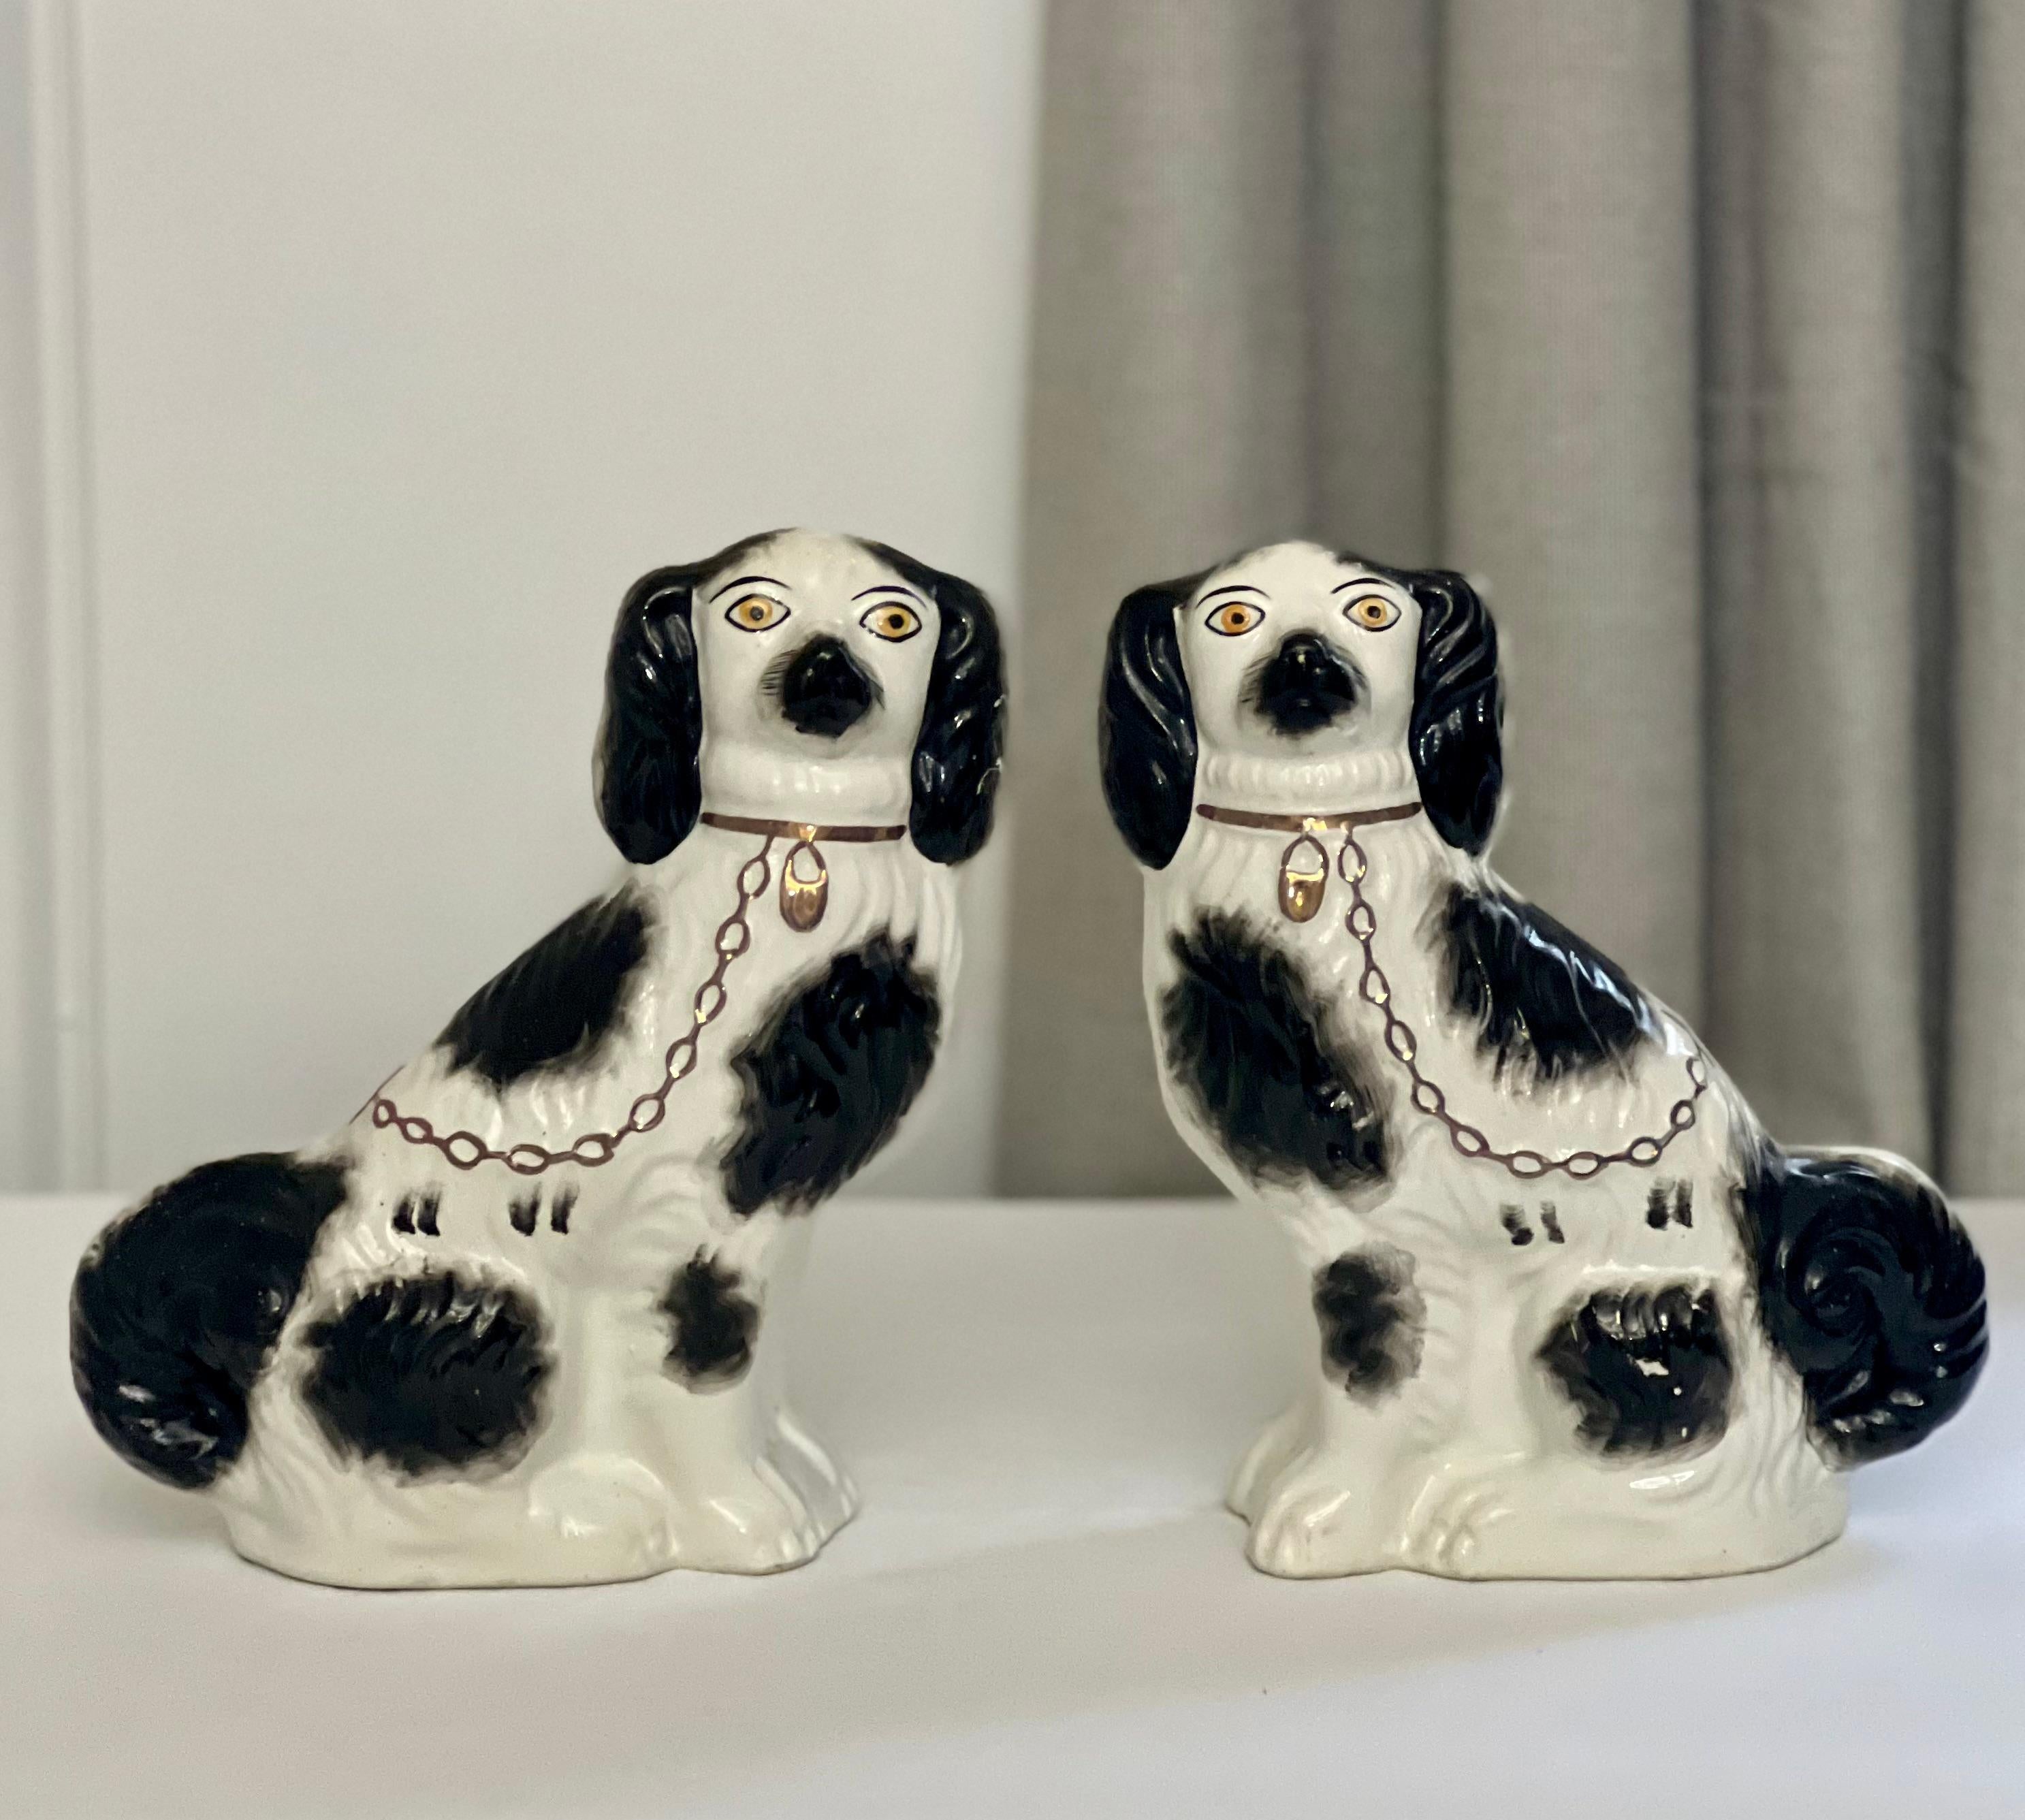 Facing pair of Staffordshire spaniel figurines, England, c. 1920.

Charming hand-painted ceramic King Charles Cavalier Spaniels in black and white paint decoration with a gilt collar and chain. With faces full of character and sweet expression, the